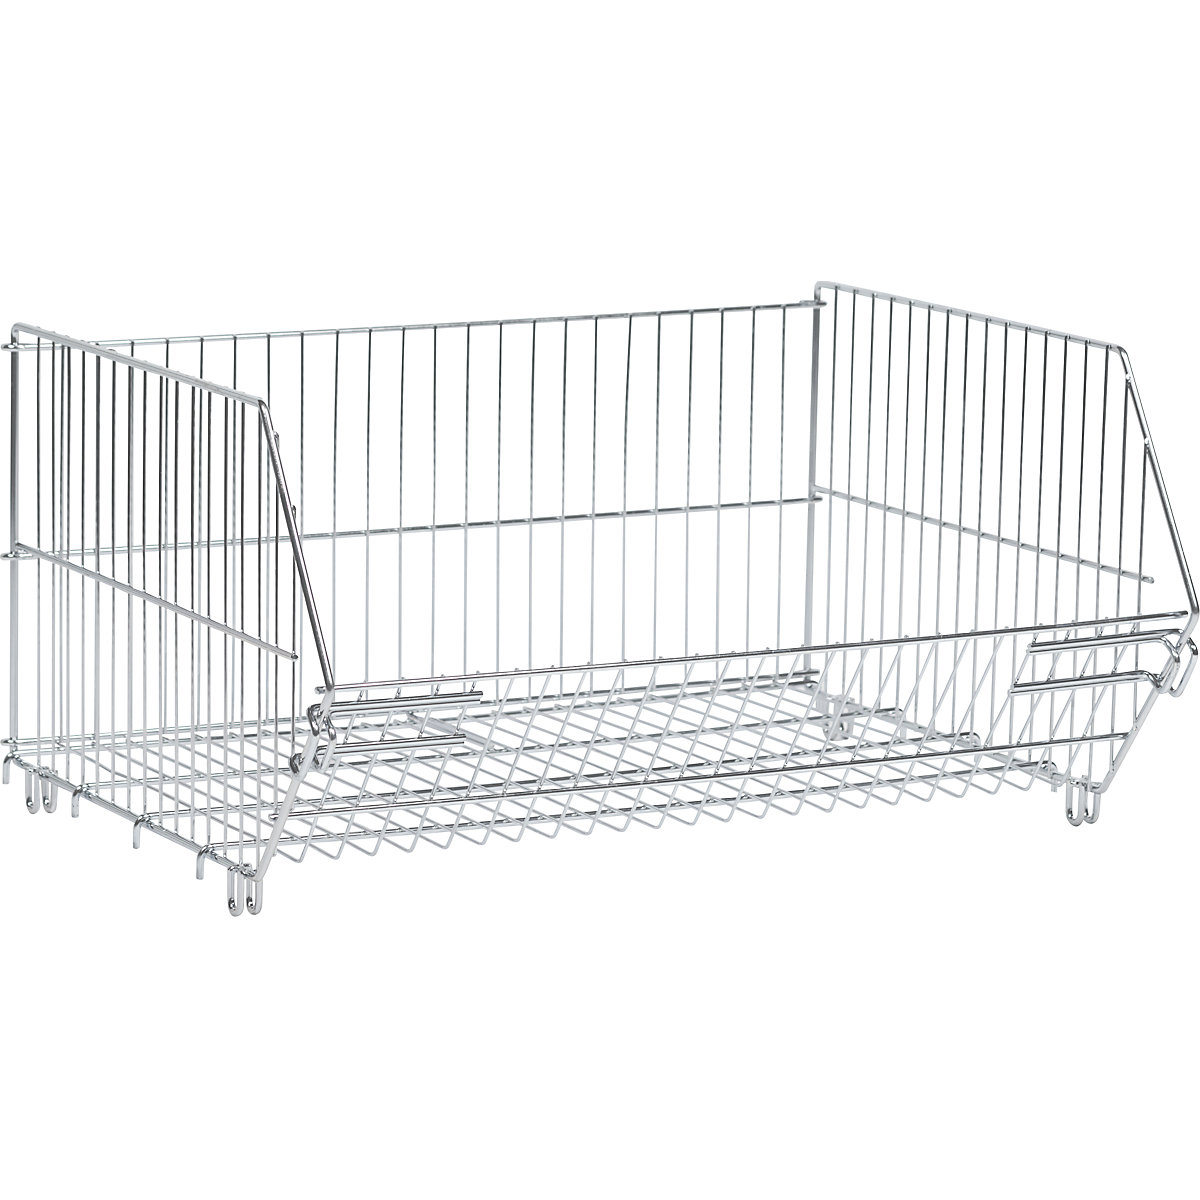 Stacking basket for shelving, LxWxH 620 x 500 x 300 mm, zinc plated-4